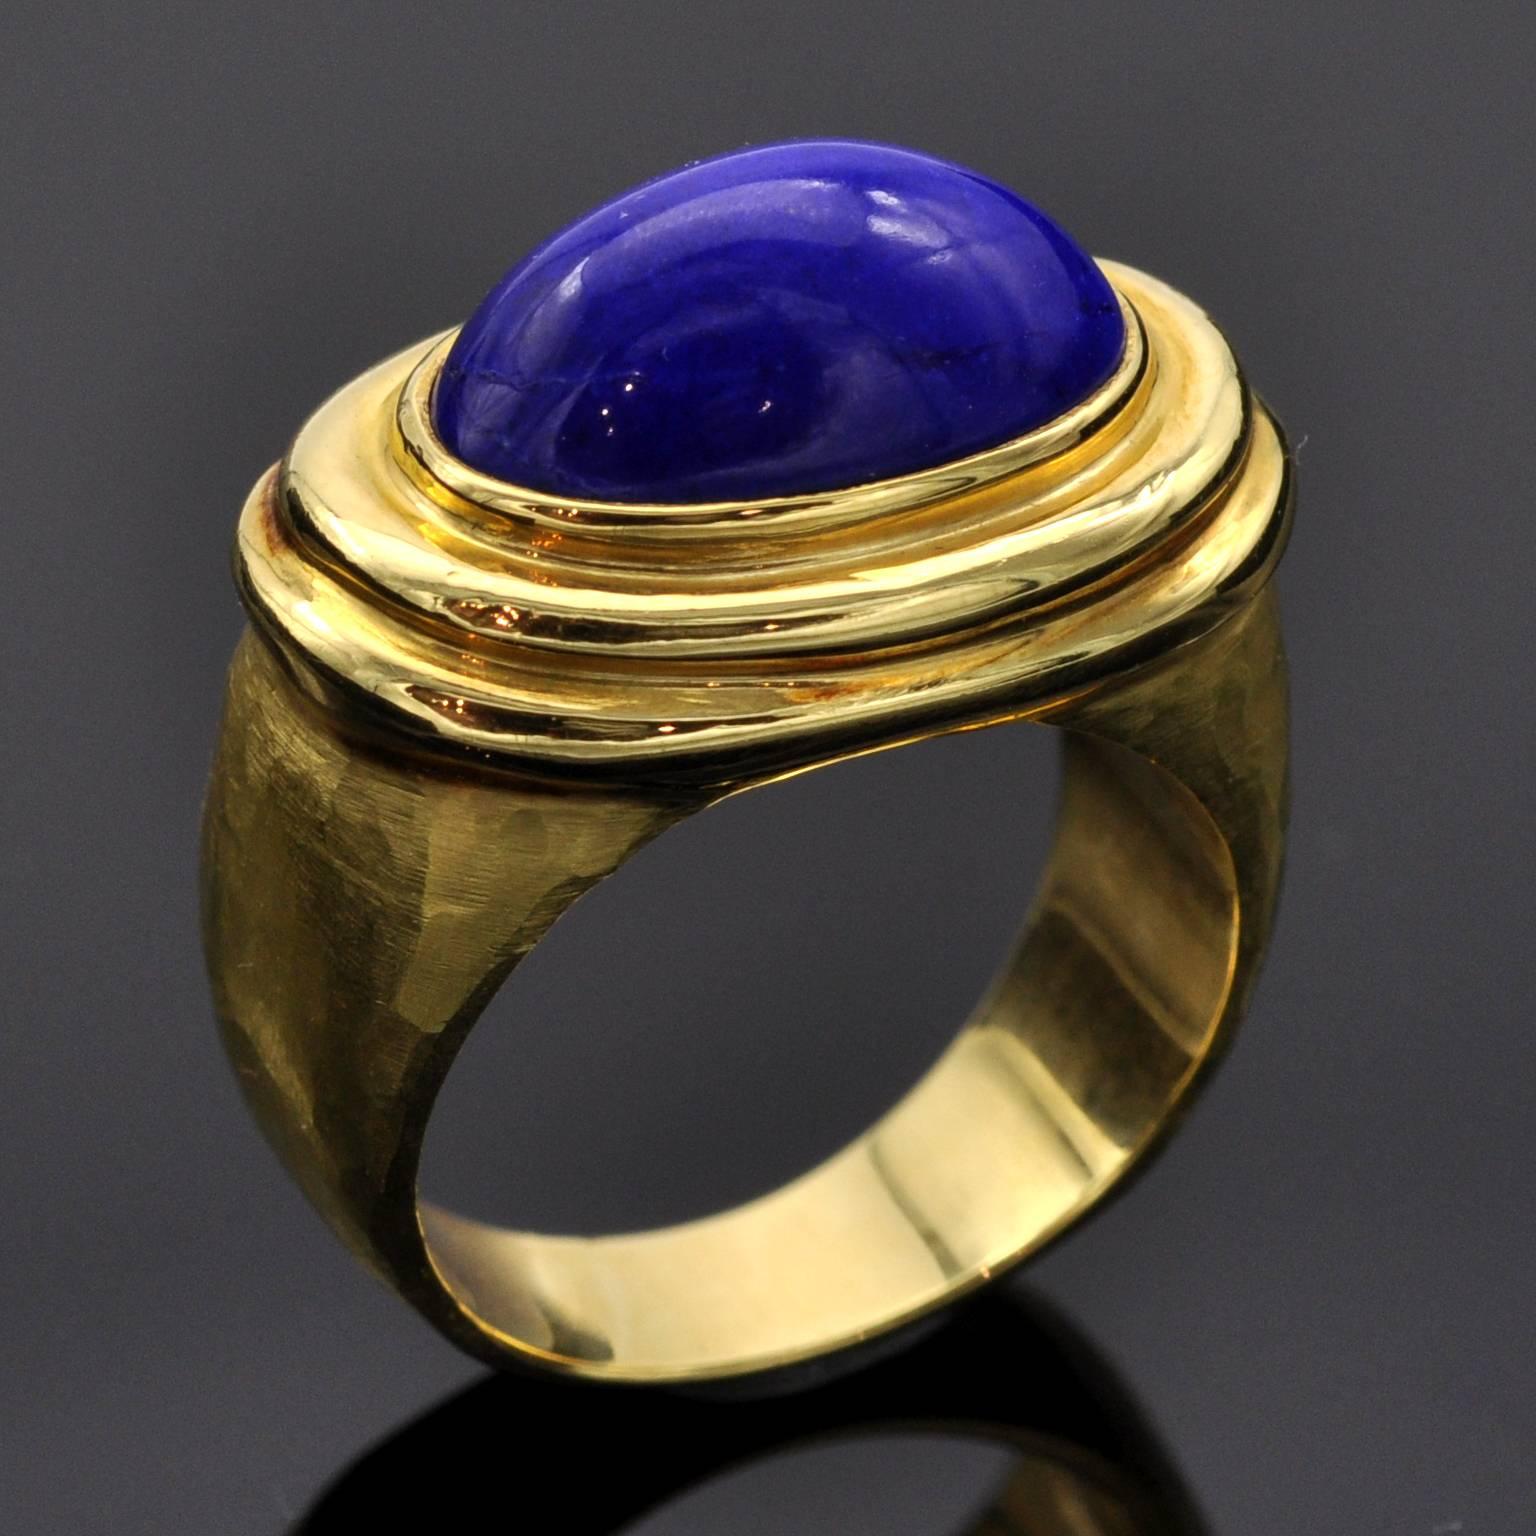 Hammered and polished 18kt gold with a bezel set top quality vivid blue lapis lazuli . This ring has definitely a simple yet strong design.

Matching Earrings are available ref LU47232798673